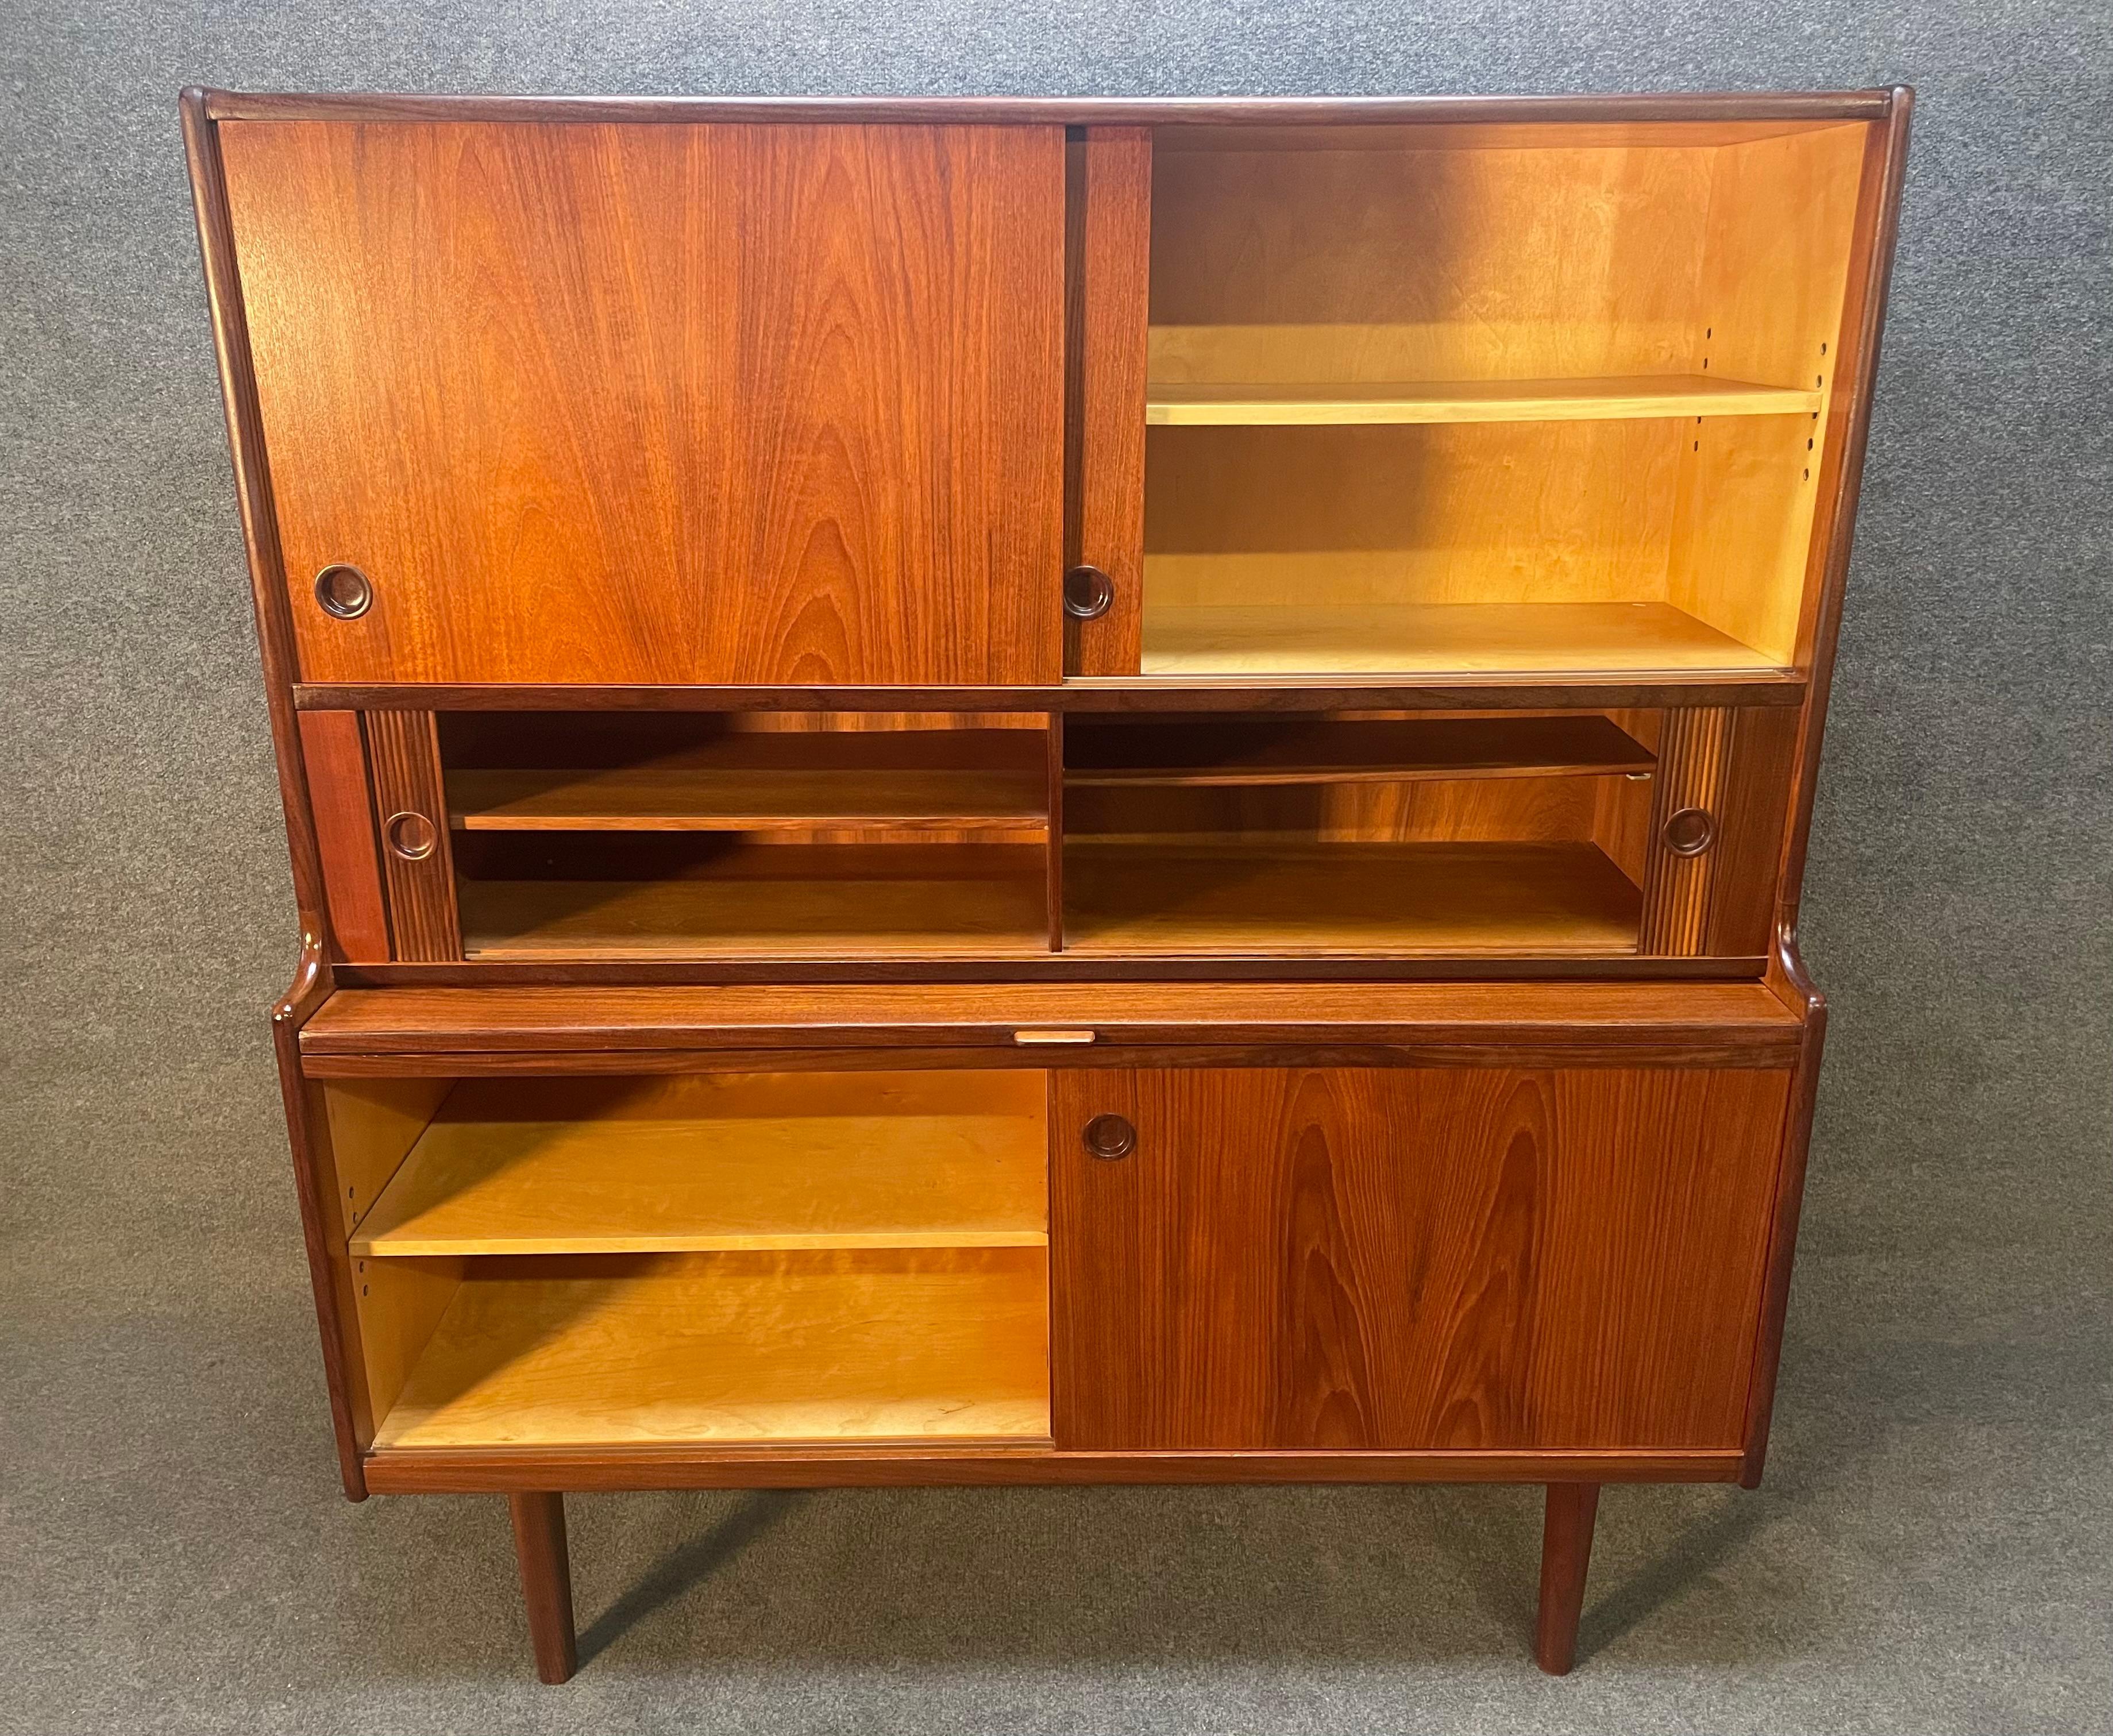 Here is a beautiful Scandinavian modern highboard in teak wood designed by Johannes Andersen and manufactured by Uldum Mobelfabrik in Denmark in the 1960's.
This exquisite piece, recently imported from Europe to California before its refinishing,